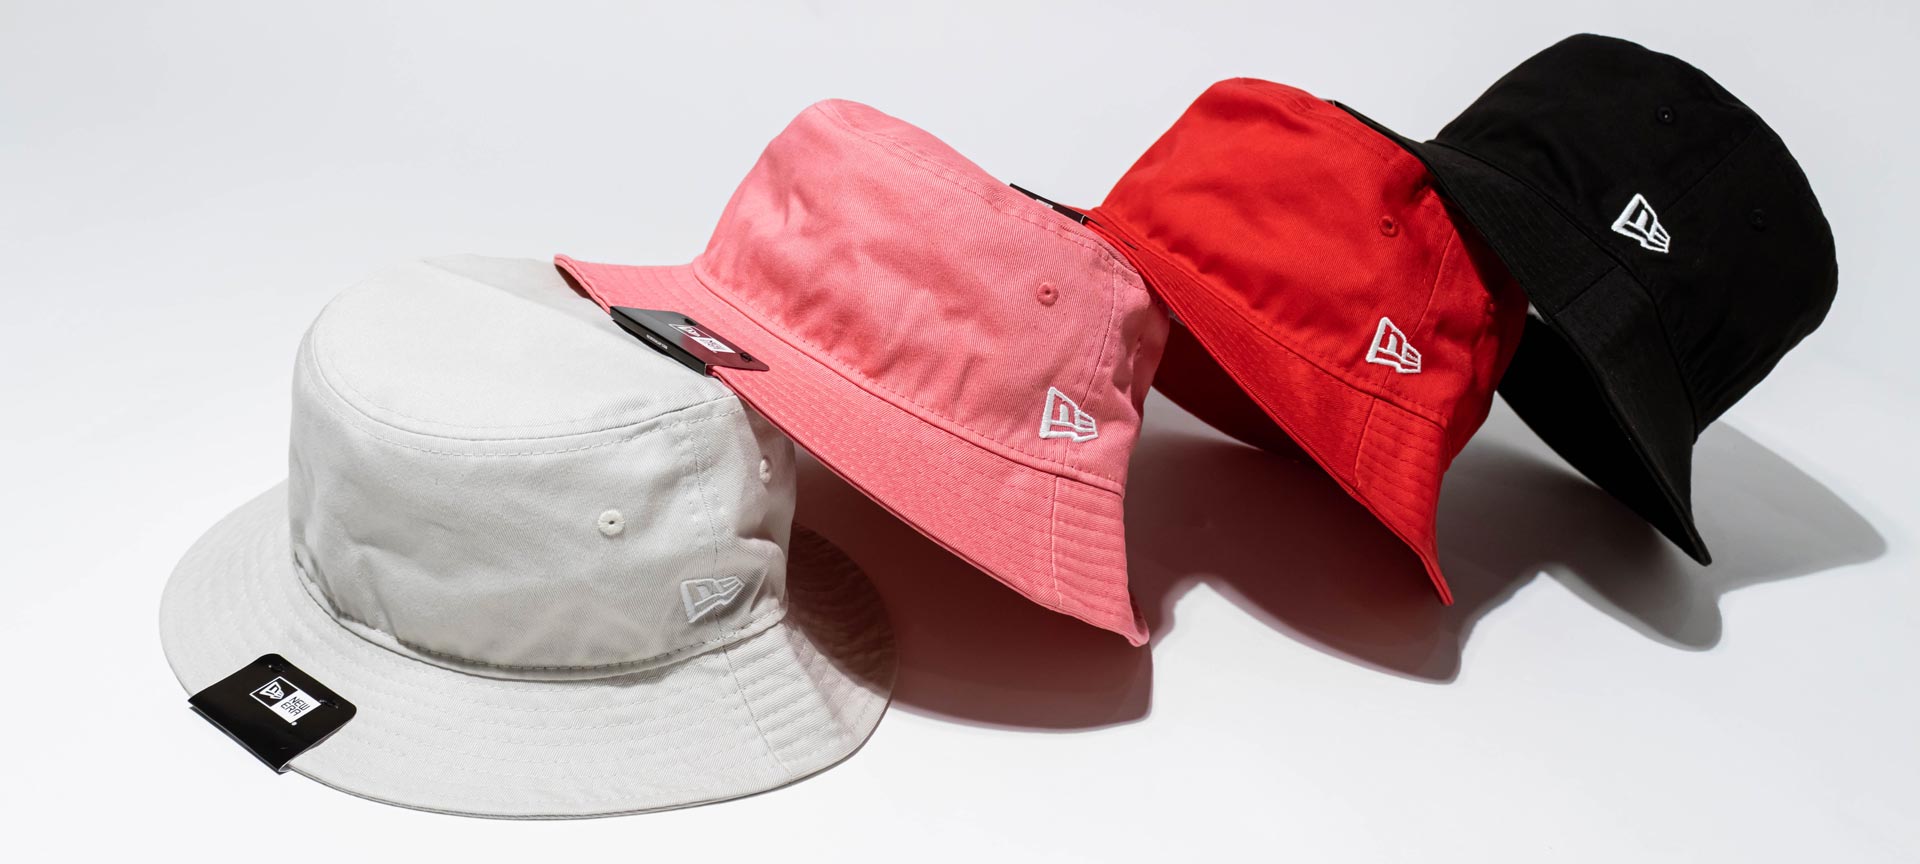 NEW ERA  Prominent Japanese Streetwear and Sneaker Boutique